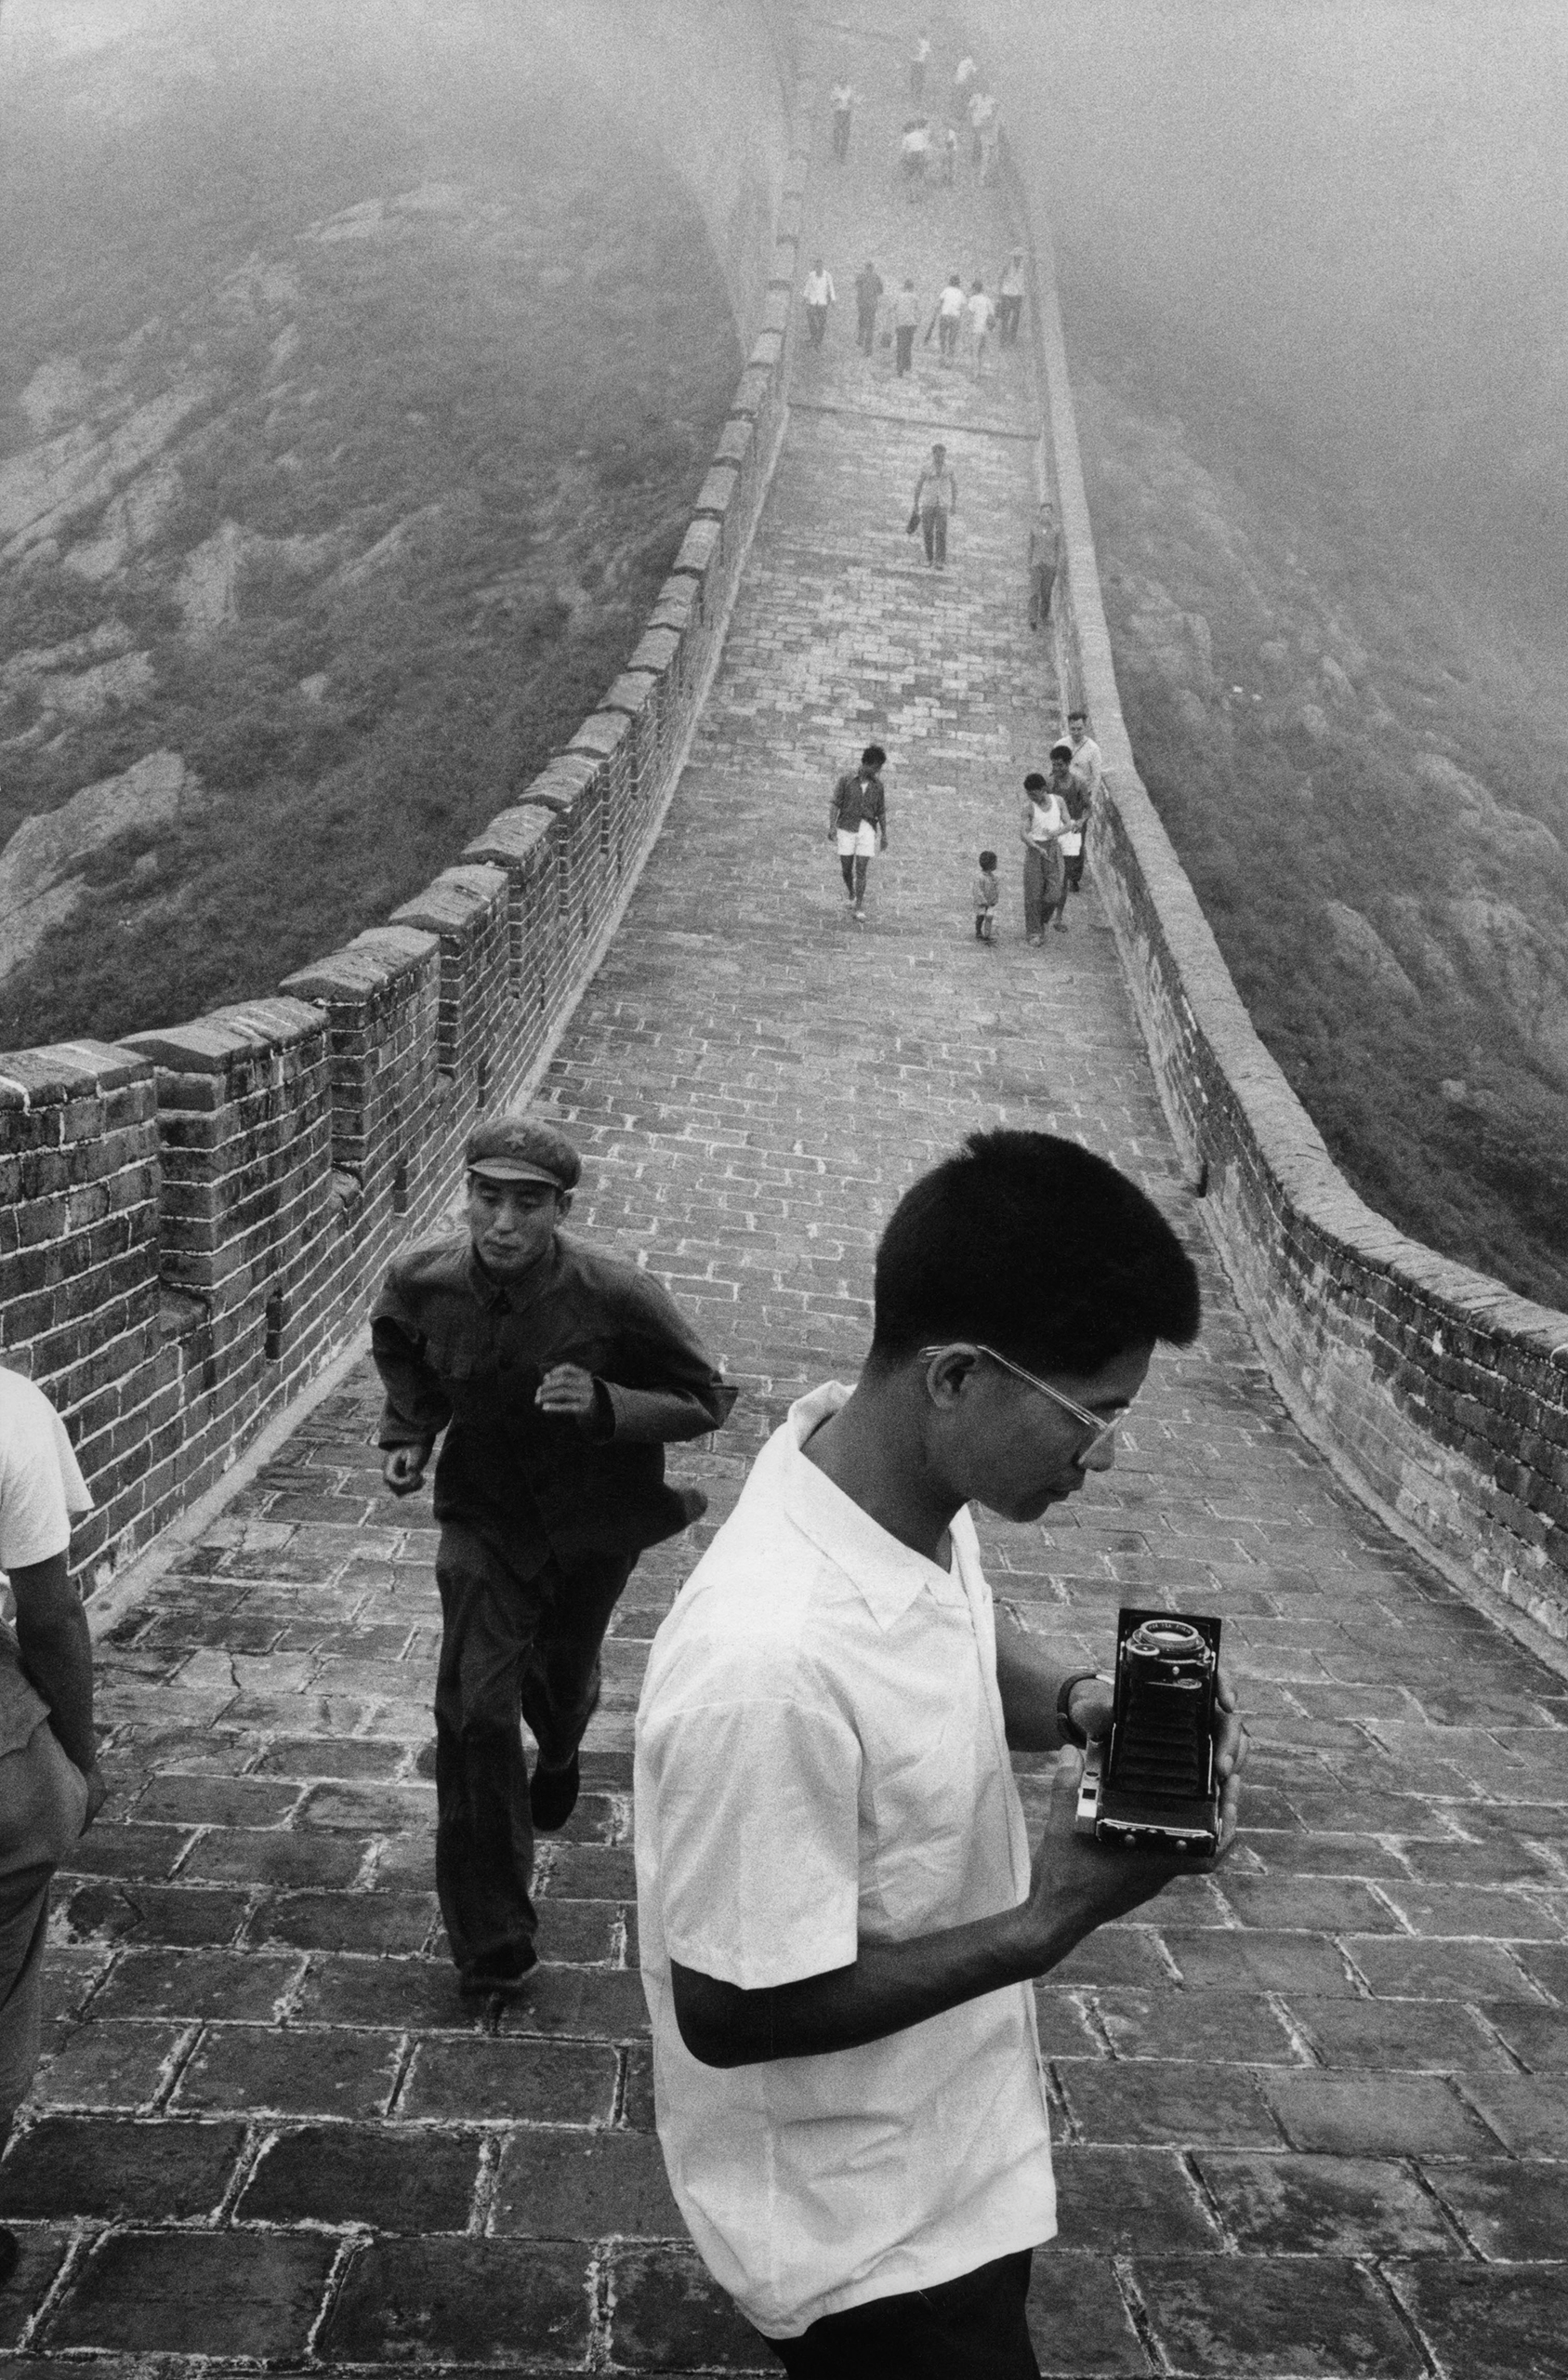 The Great Wall in Hebei Province, China, 1971.